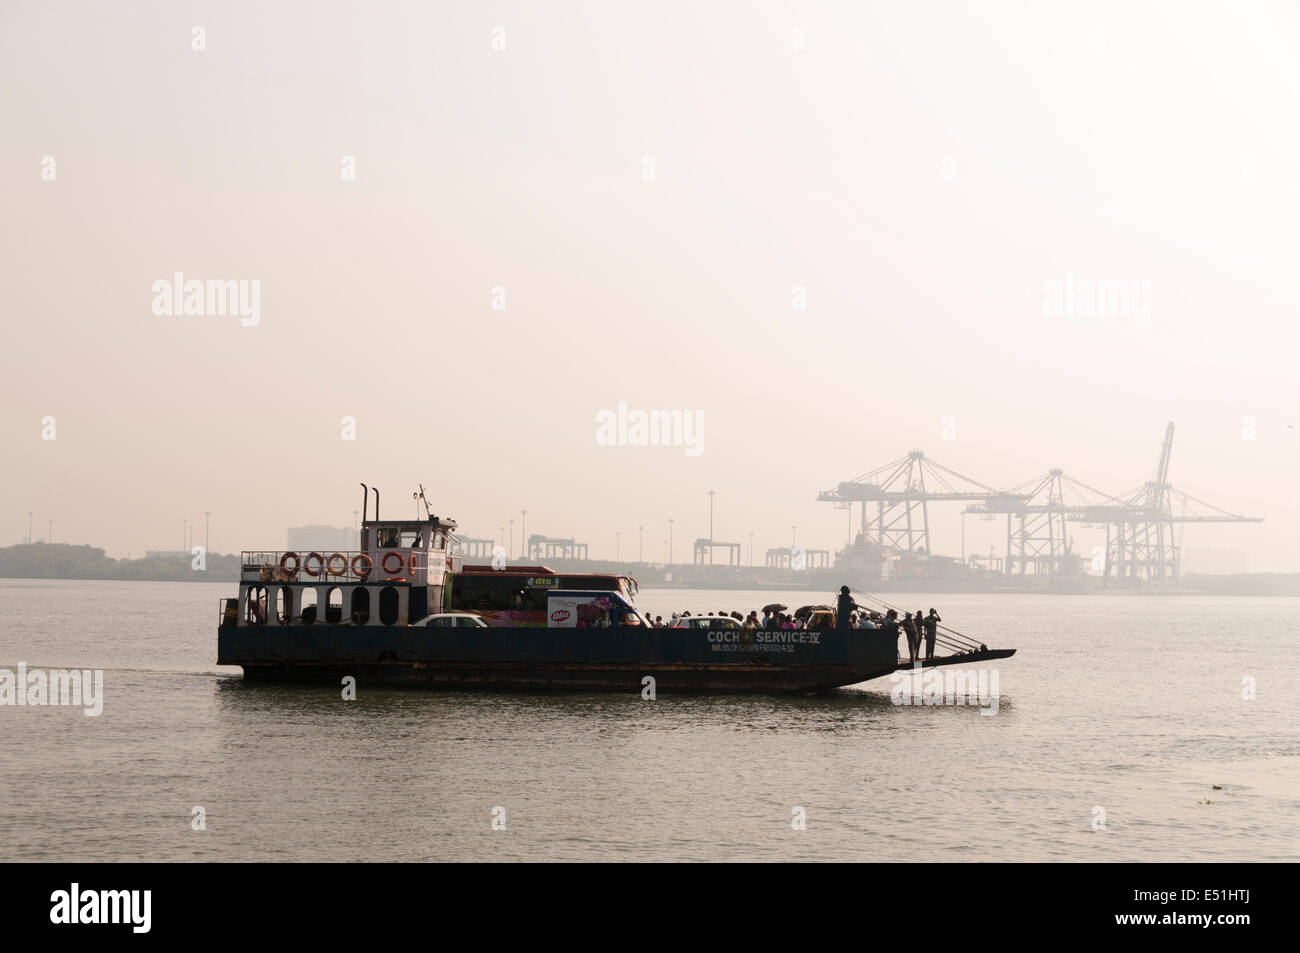 Ferry boat carrying people and cars, India Stock Photo